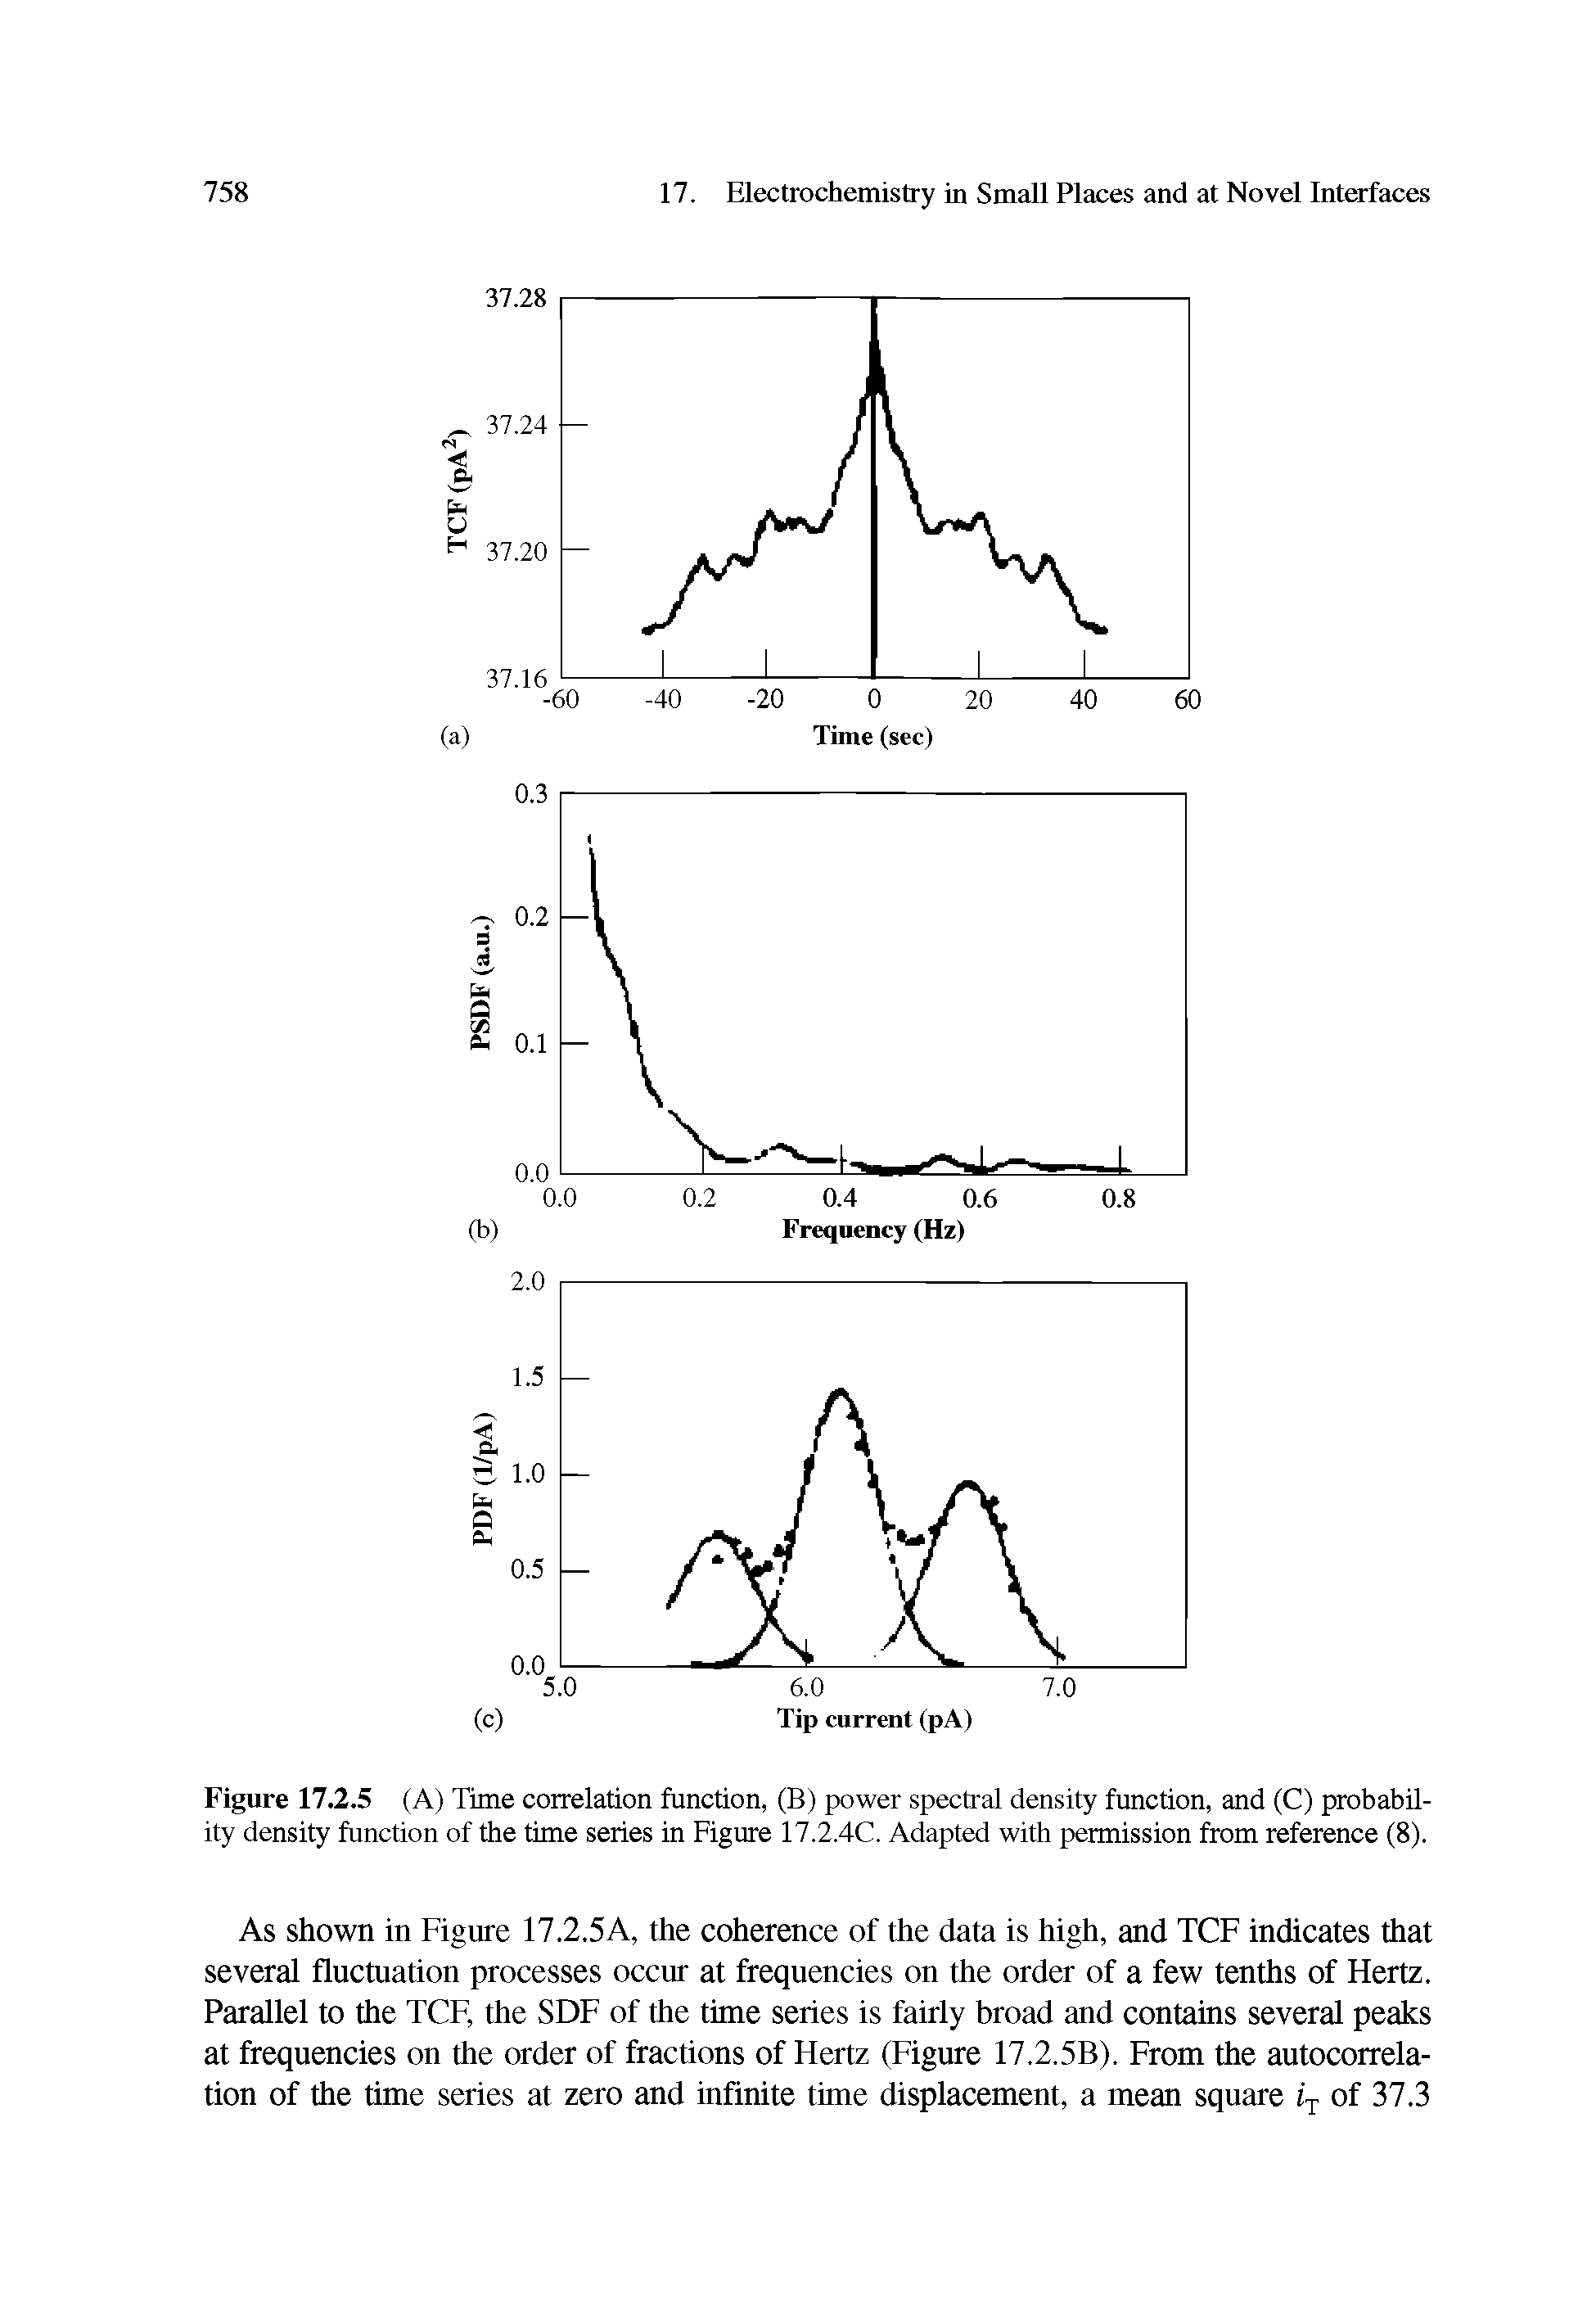 Figure 17.2.5 (A) Time correlation function, (B) power spectral density function, and (C) probability density function of the time series in Figure 17.2.4C. Adapted with permission from reference (8).